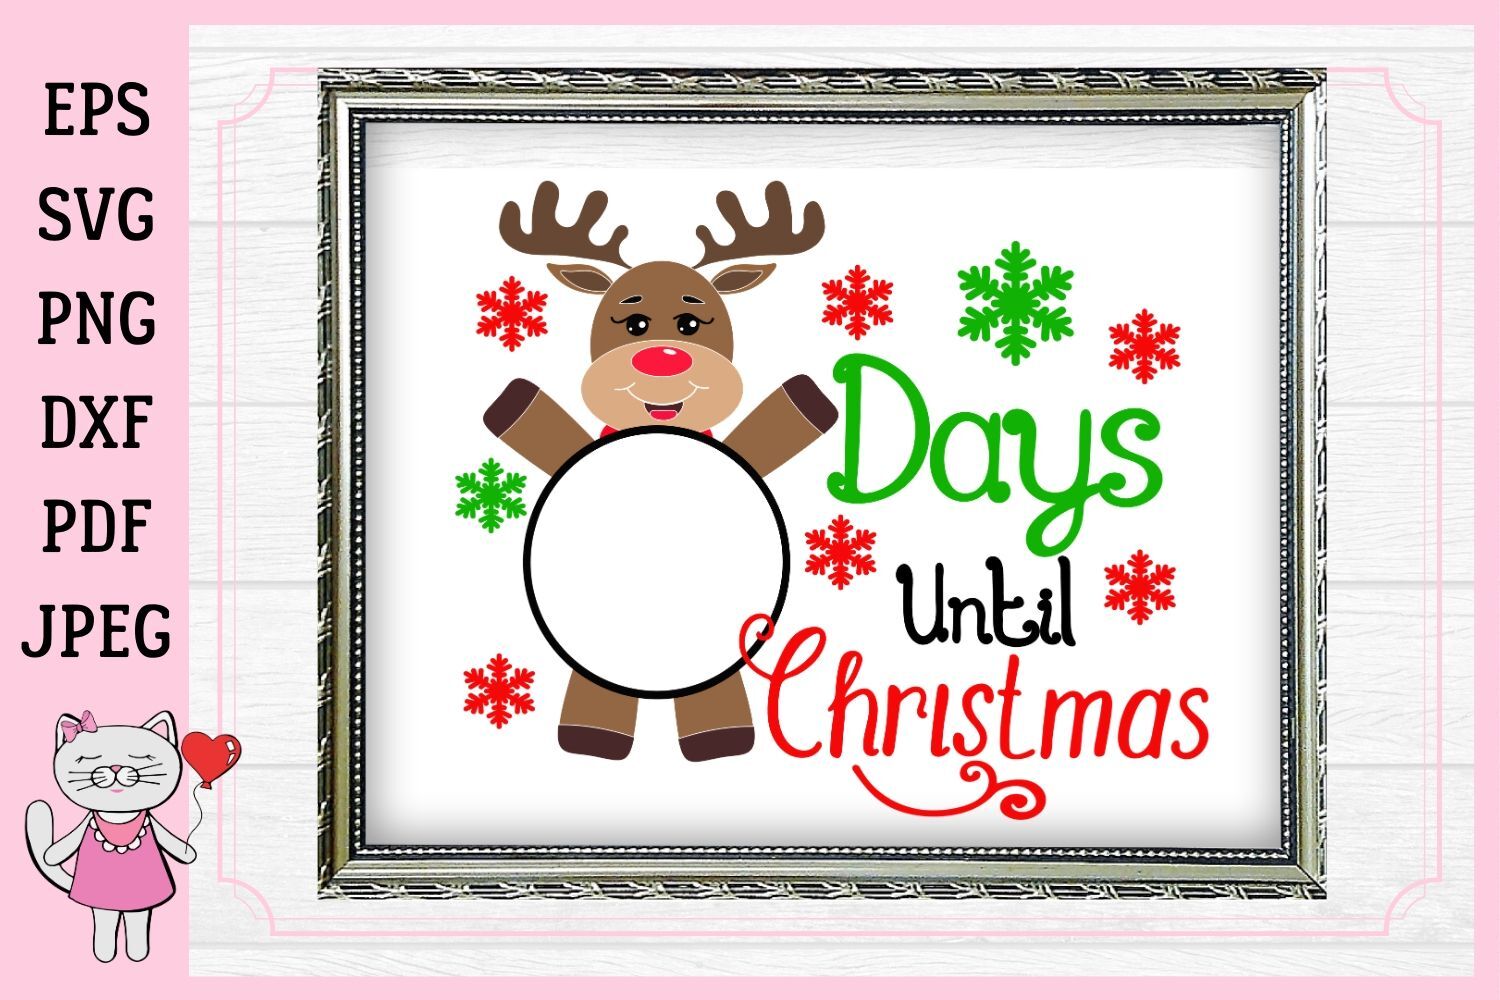 How Many Days Until Christmas Countdown App